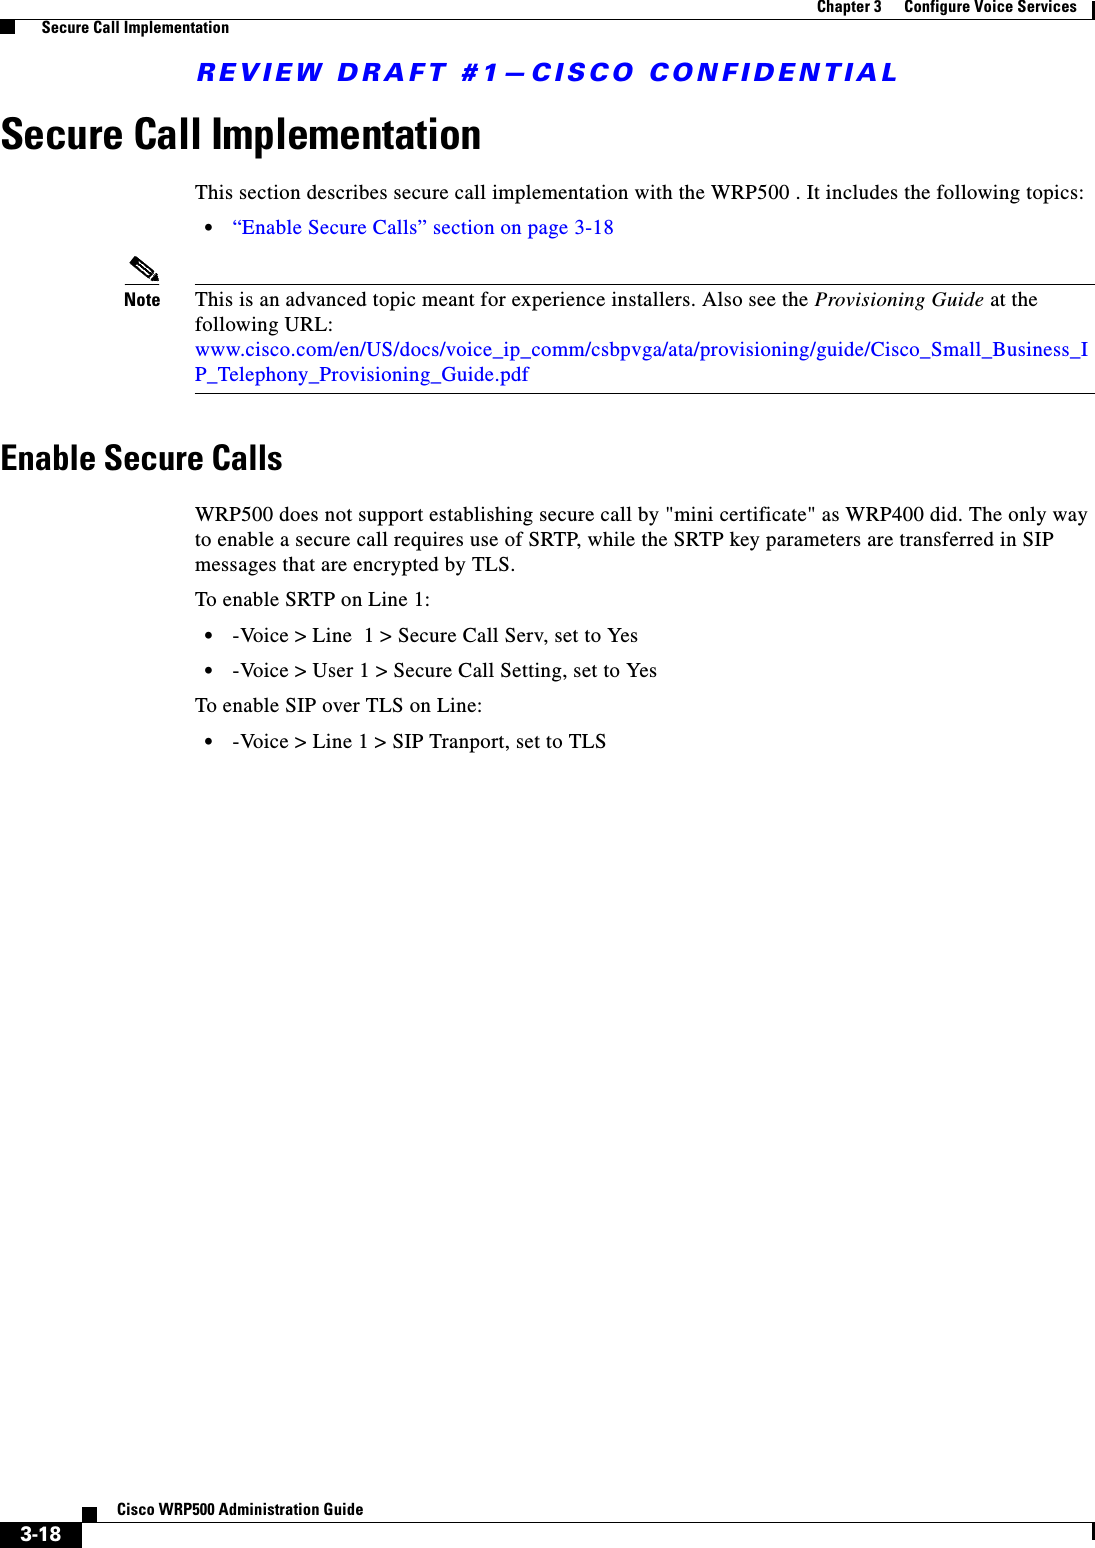 REVIEW DRAFT #1—CISCO CONFIDENTIAL3-18Cisco WRP500 Administration Guide Chapter 3      Configure Voice Services  Secure Call ImplementationSecure Call Implementation This section describes secure call implementation with the WRP500 . It includes the following topics:•“Enable Secure Calls” section on page 3-18Note This is an advanced topic meant for experience installers. Also see the Provisioning Guide at the following URL:www.cisco.com/en/US/docs/voice_ip_comm/csbpvga/ata/provisioning/guide/Cisco_Small_Business_IP_Telephony_Provisioning_Guide.pdfEnable Secure CallsWRP500 does not support establishing secure call by &quot;mini certificate&quot; as WRP400 did. The only way to enable a secure call requires use of SRTP, while the SRTP key parameters are transferred in SIP messages that are encrypted by TLS.To enable SRTP on Line 1:•-Voice &gt; Line  1 &gt; Secure Call Serv, set to Yes•-Voice &gt; User 1 &gt; Secure Call Setting, set to YesTo enable SIP over TLS on Line:•-Voice &gt; Line 1 &gt; SIP Tranport, set to TLS